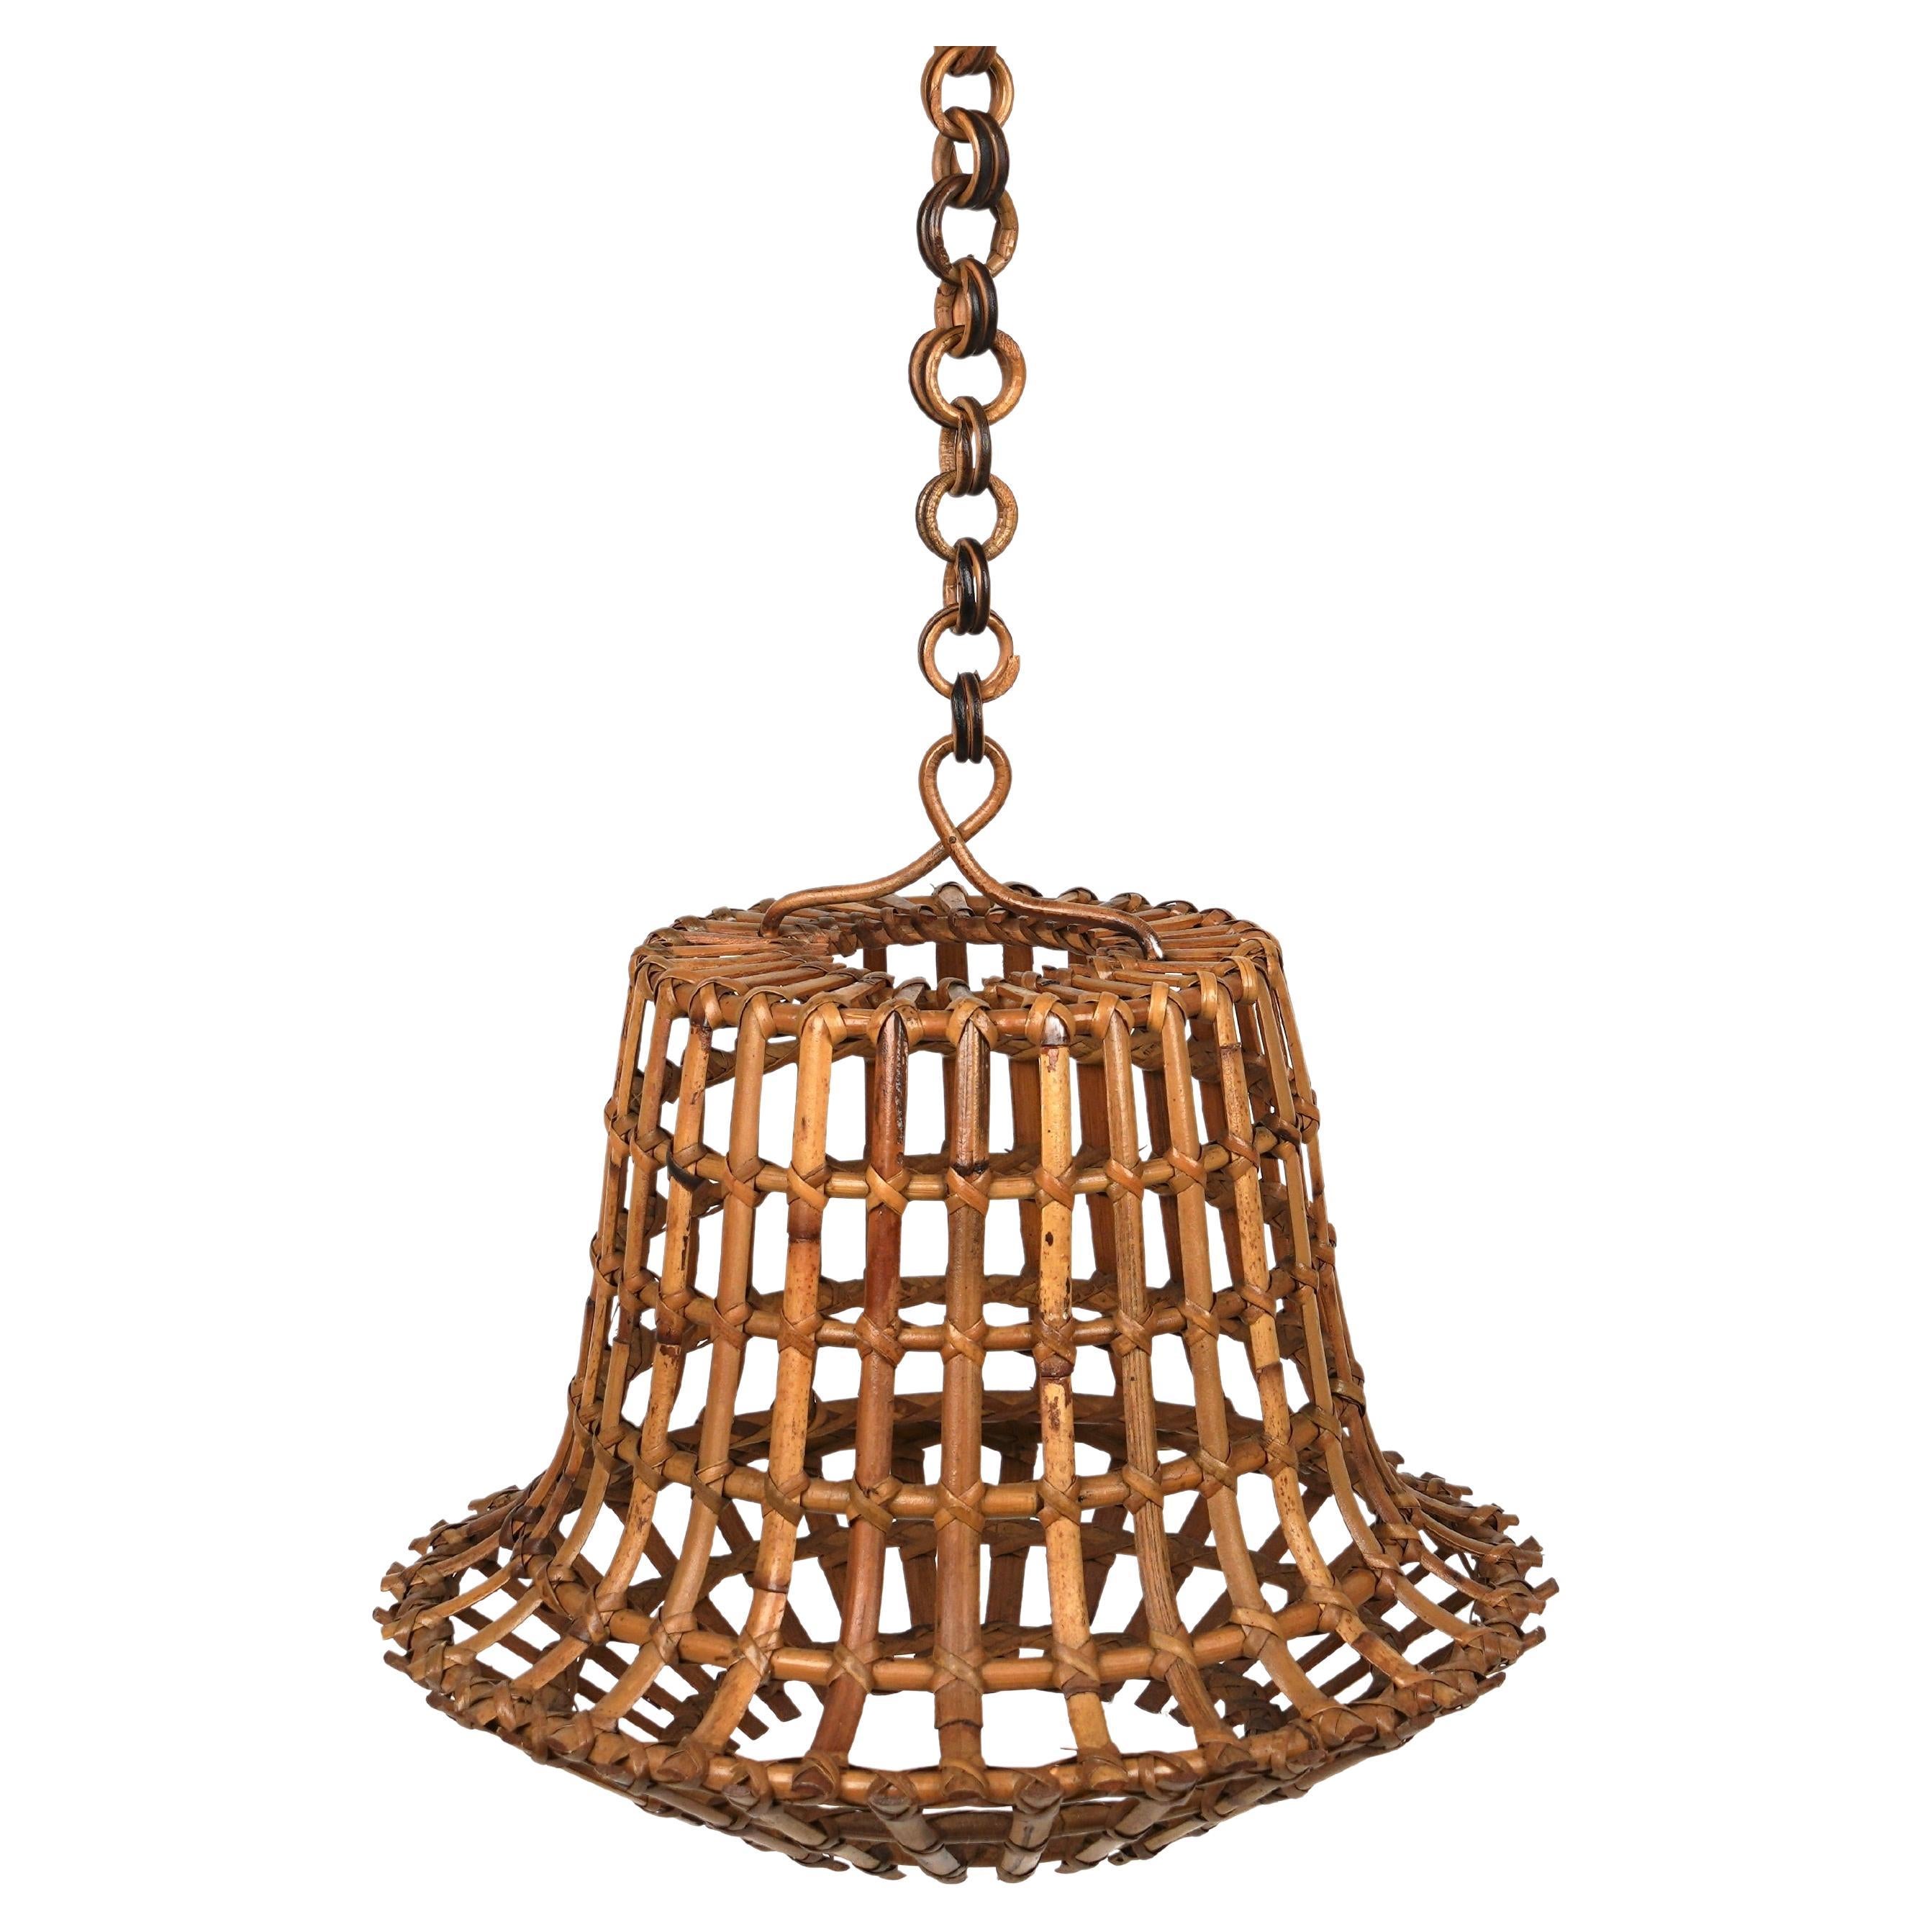 Midcentury Bamboo and Rattan Chandelier Louis Sognot Style, Italy 1960s For Sale